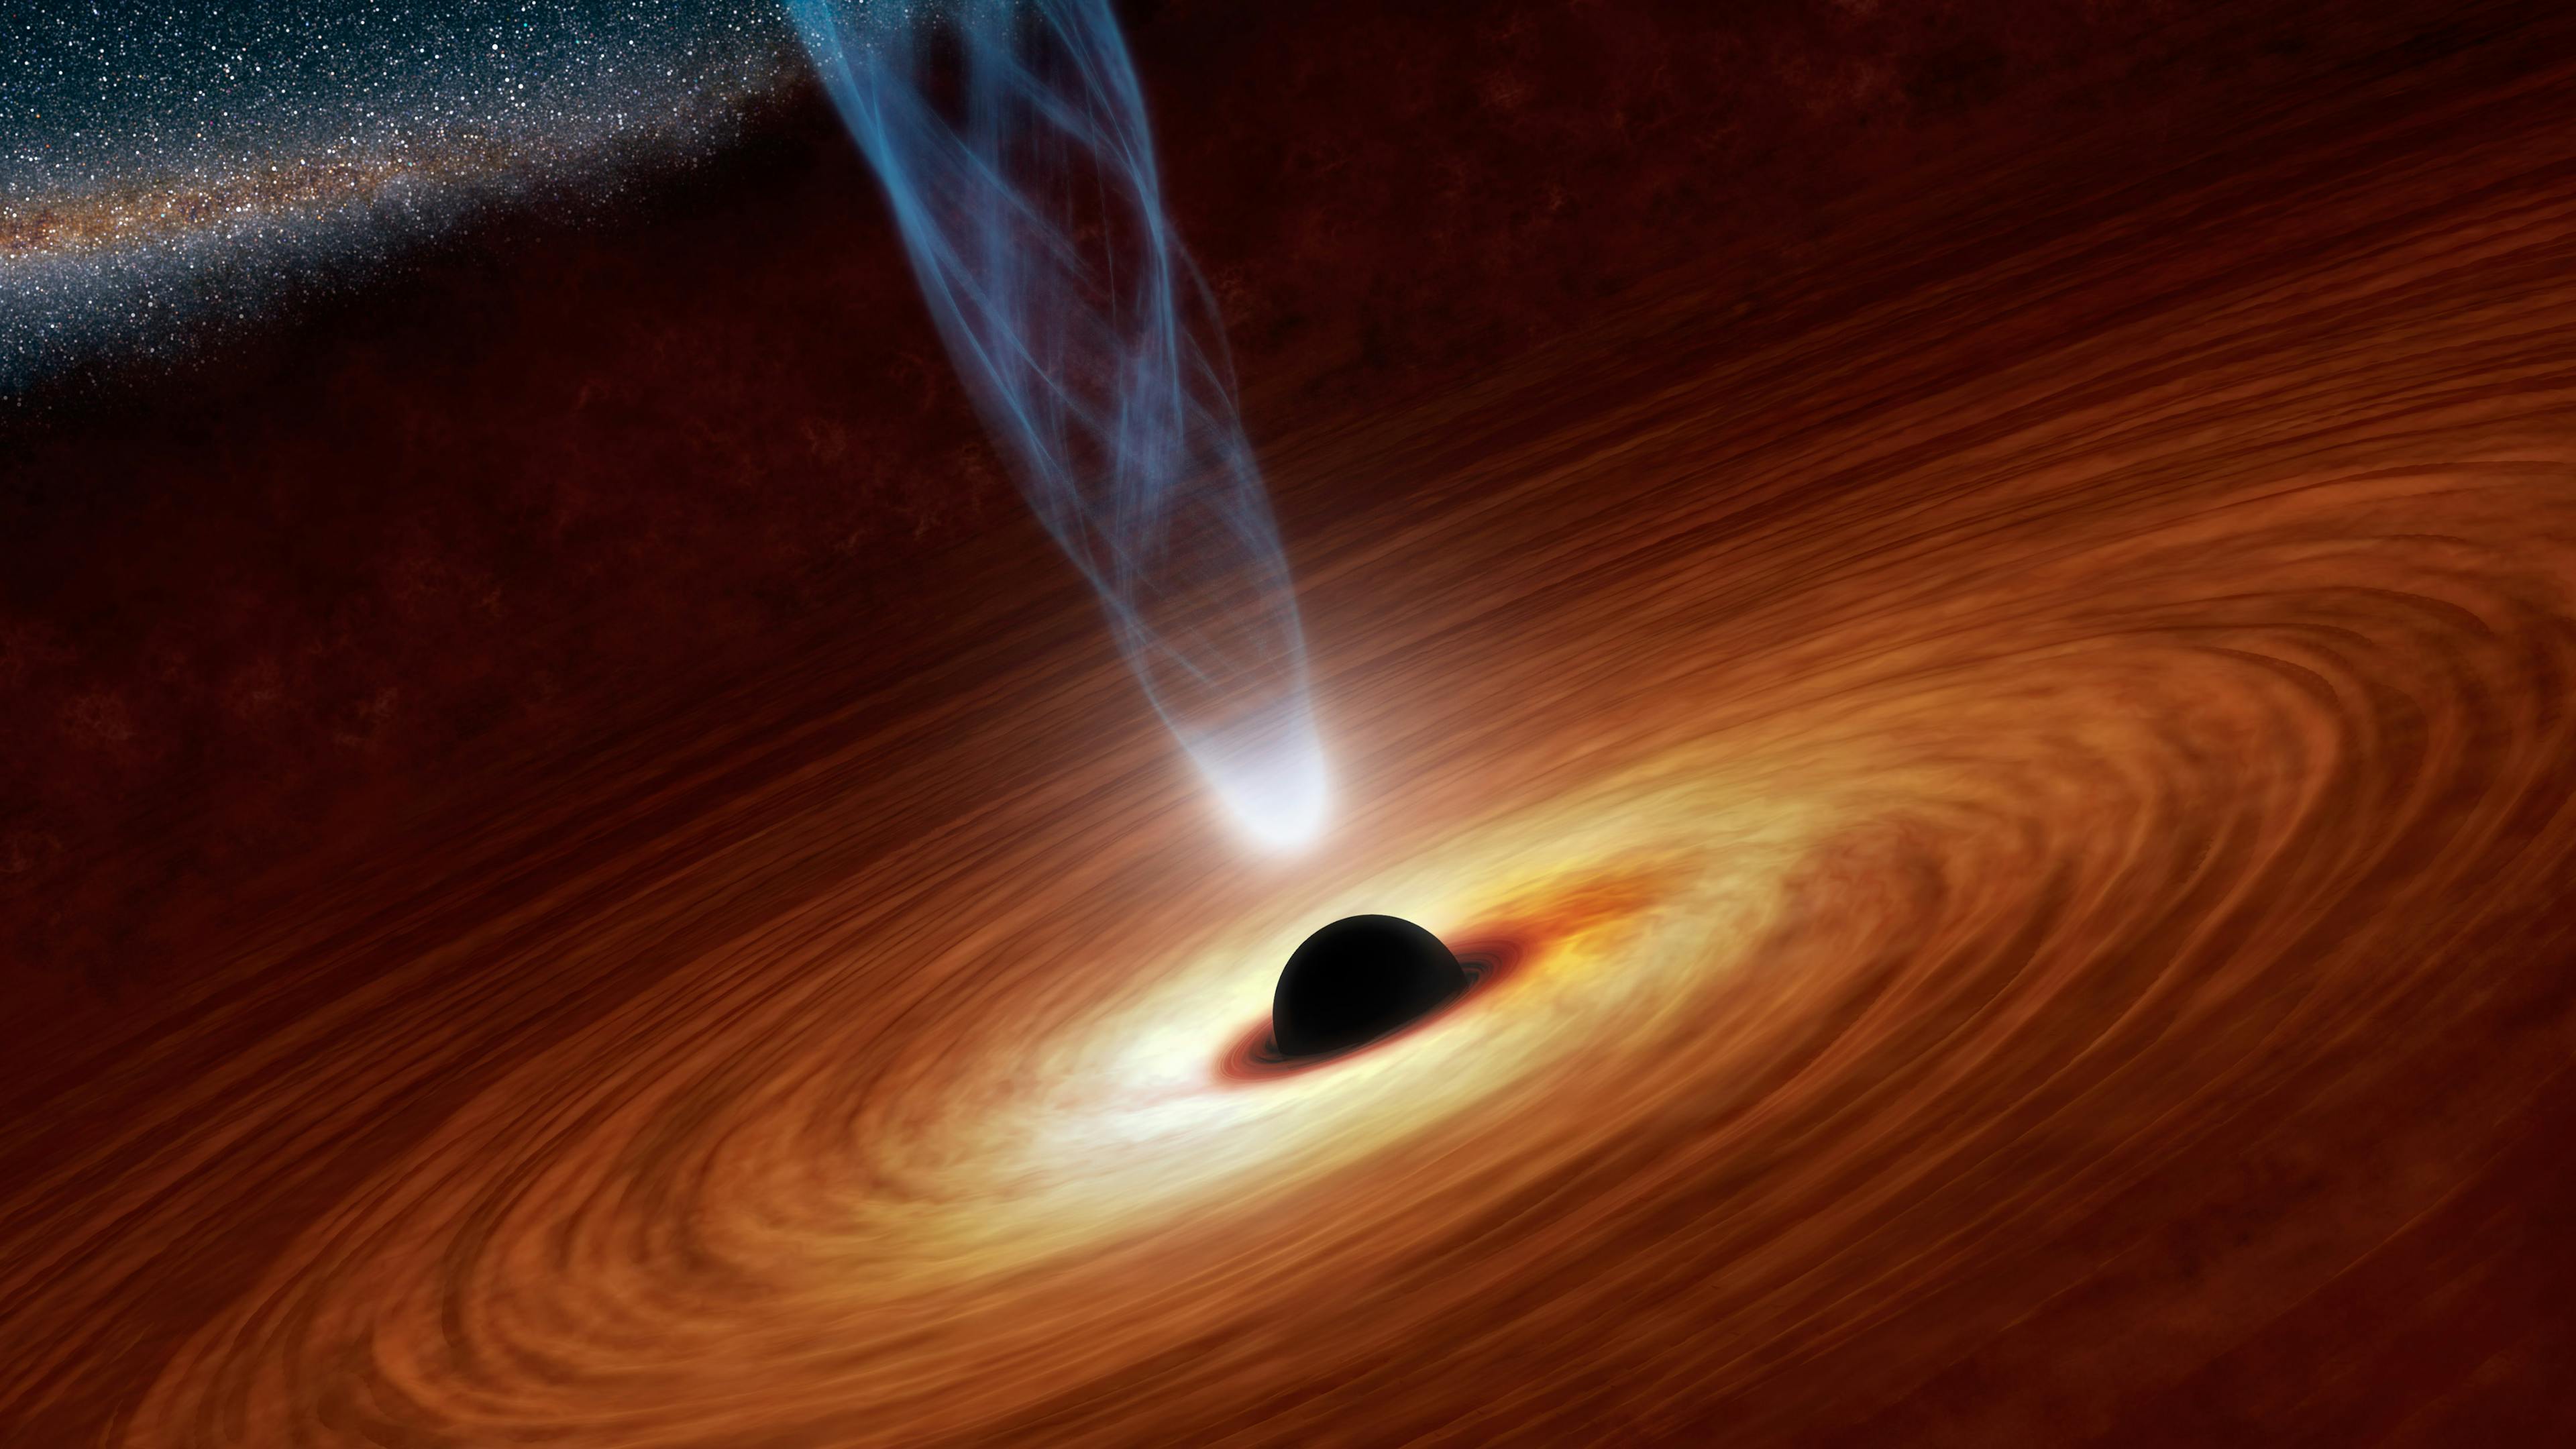 PodcAstroholic – Jumping In A Black Hole